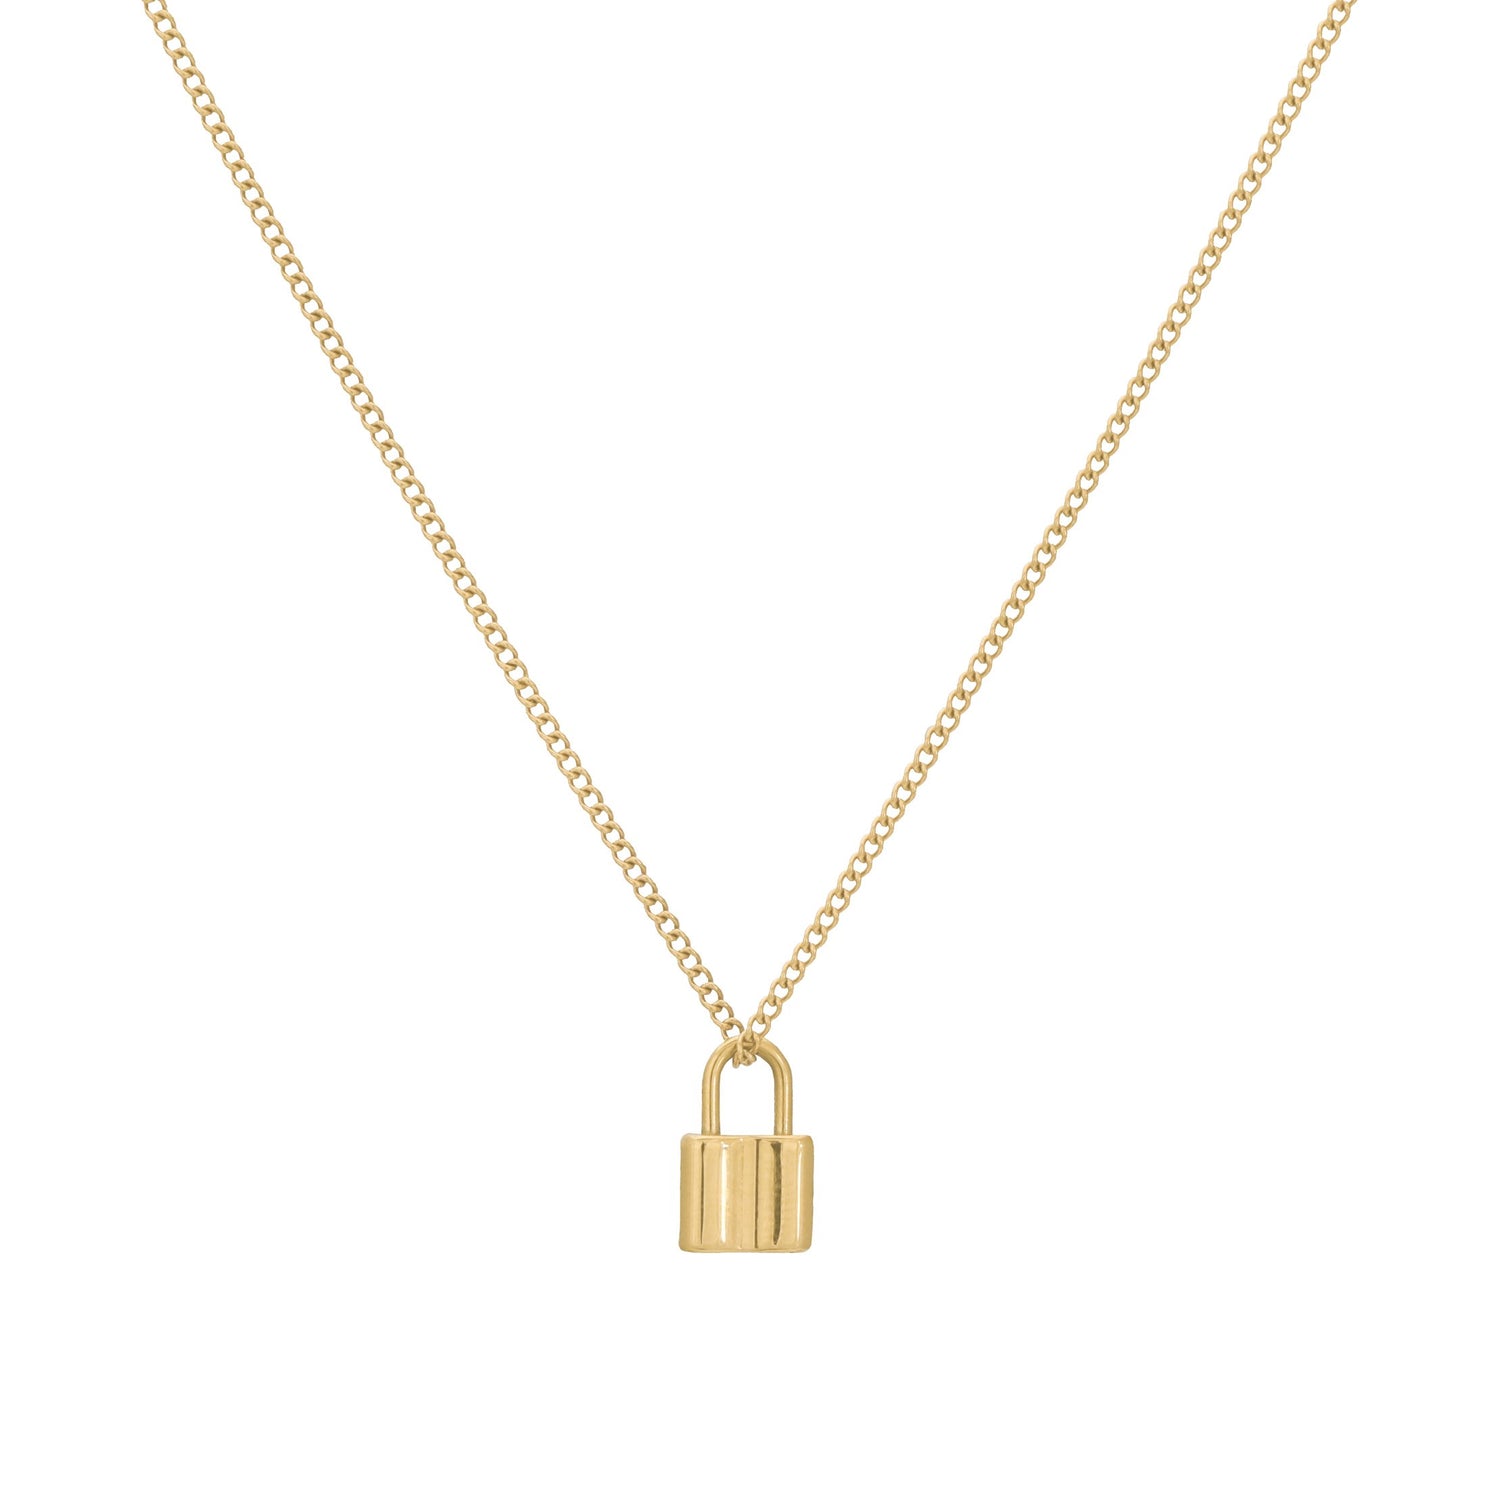 Lock Pendant Necklace – Heart Made of Gold